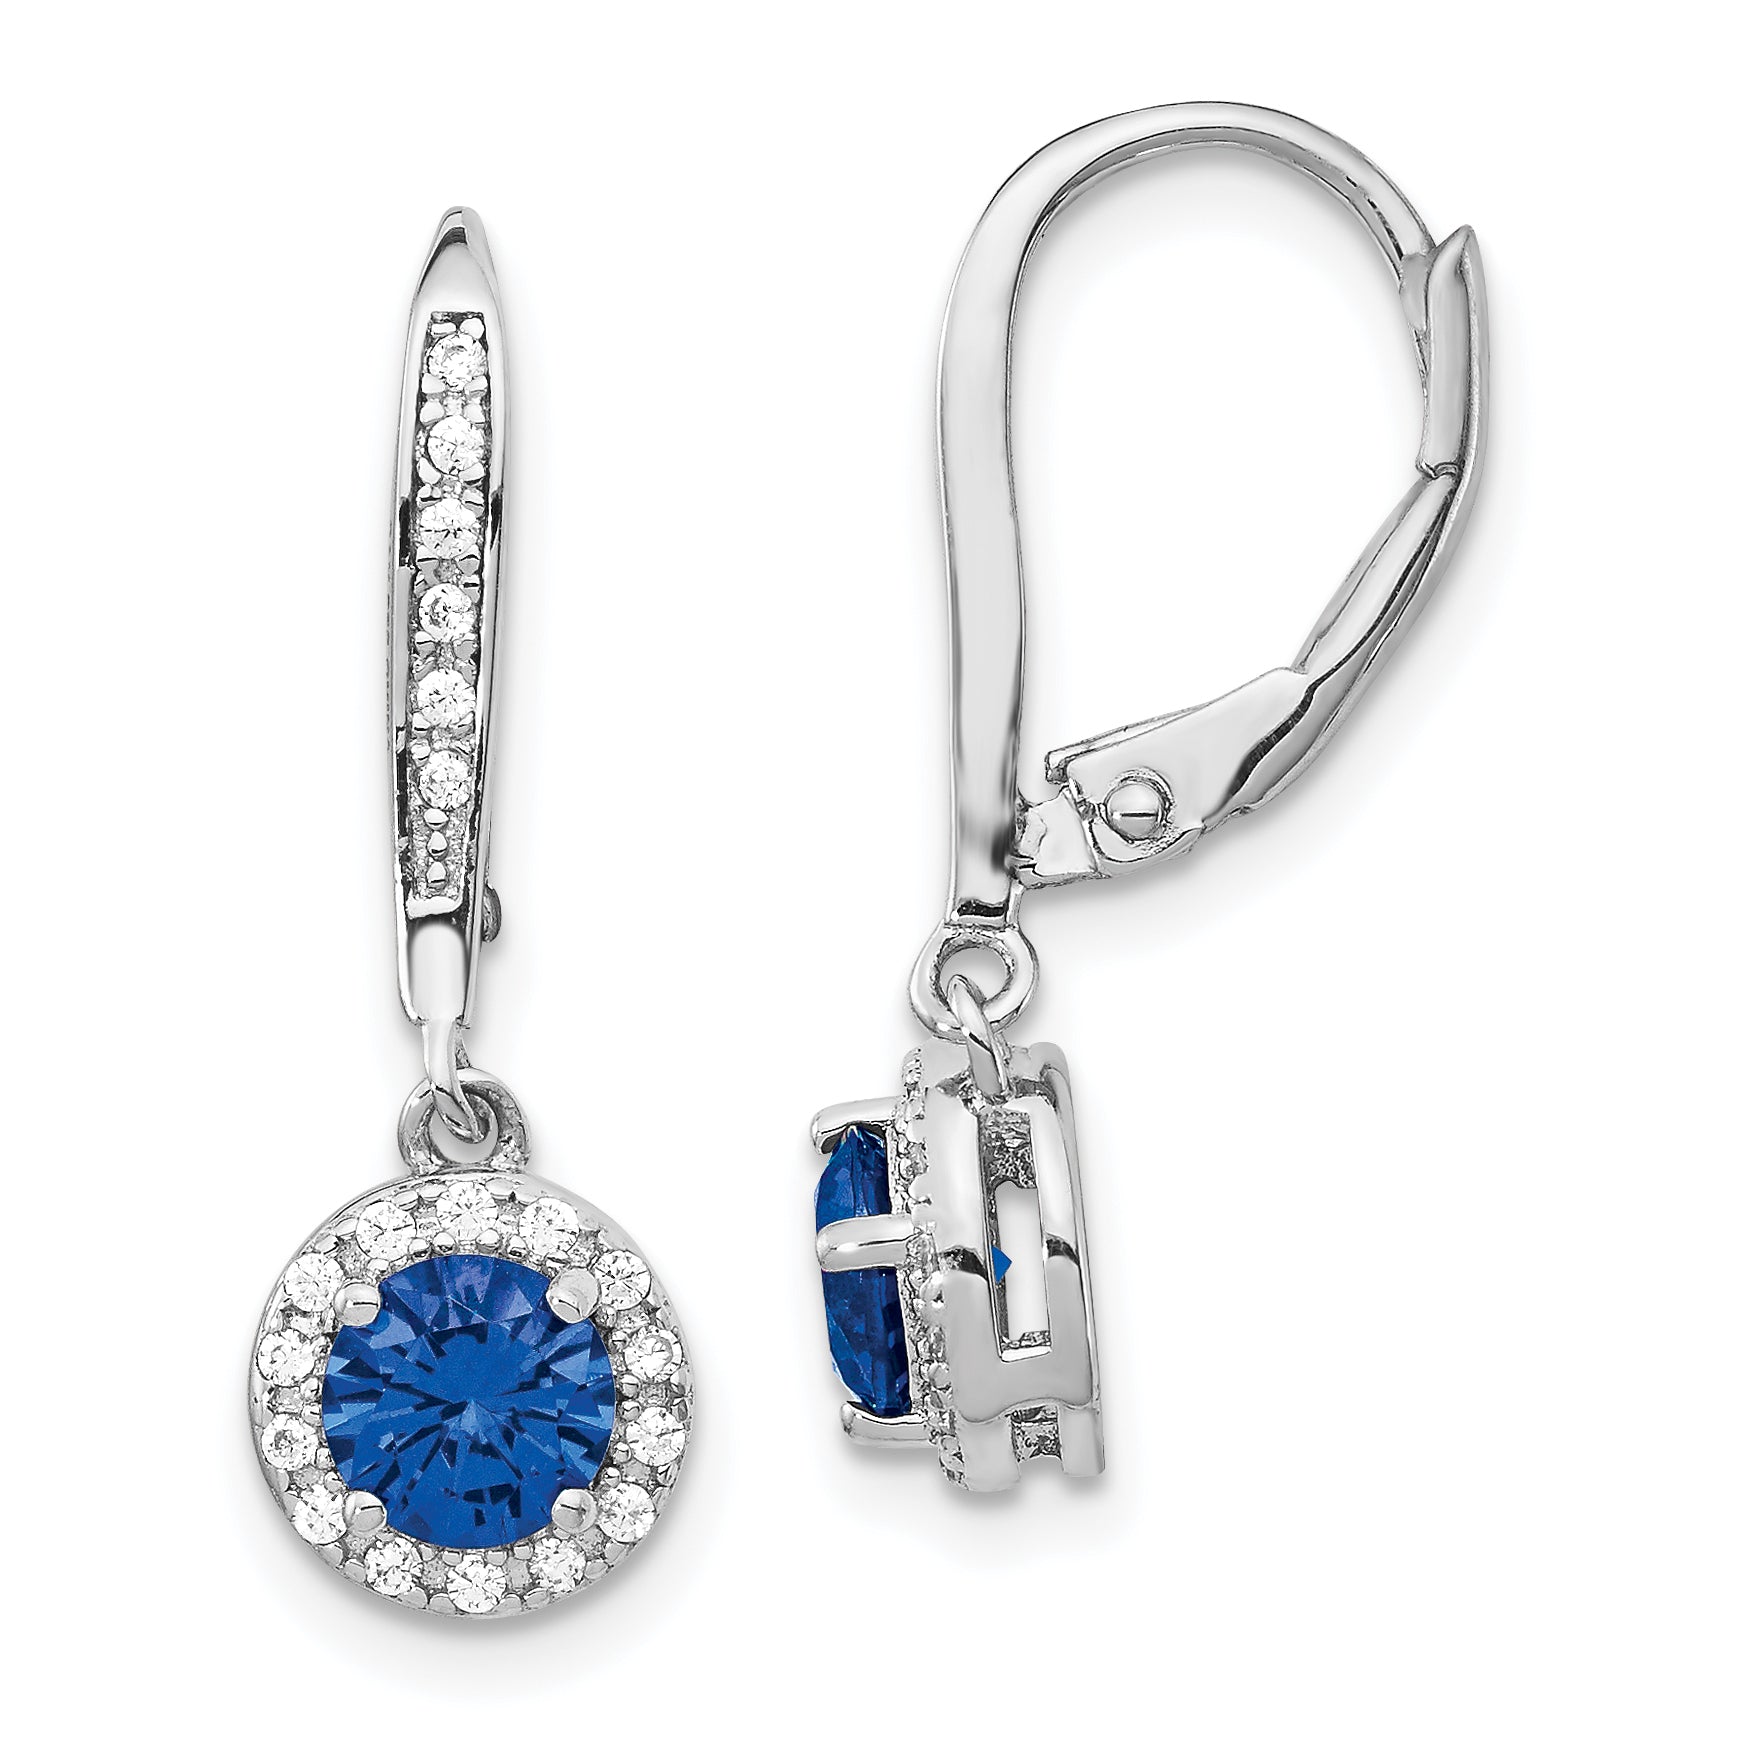 Cheryl M Sterling Silver Rhodium-plated Brilliant-cut Lab Created Dark Blue Spinel and Brilliant-cut White CZ Round Halo Leverback Dangle Earrings